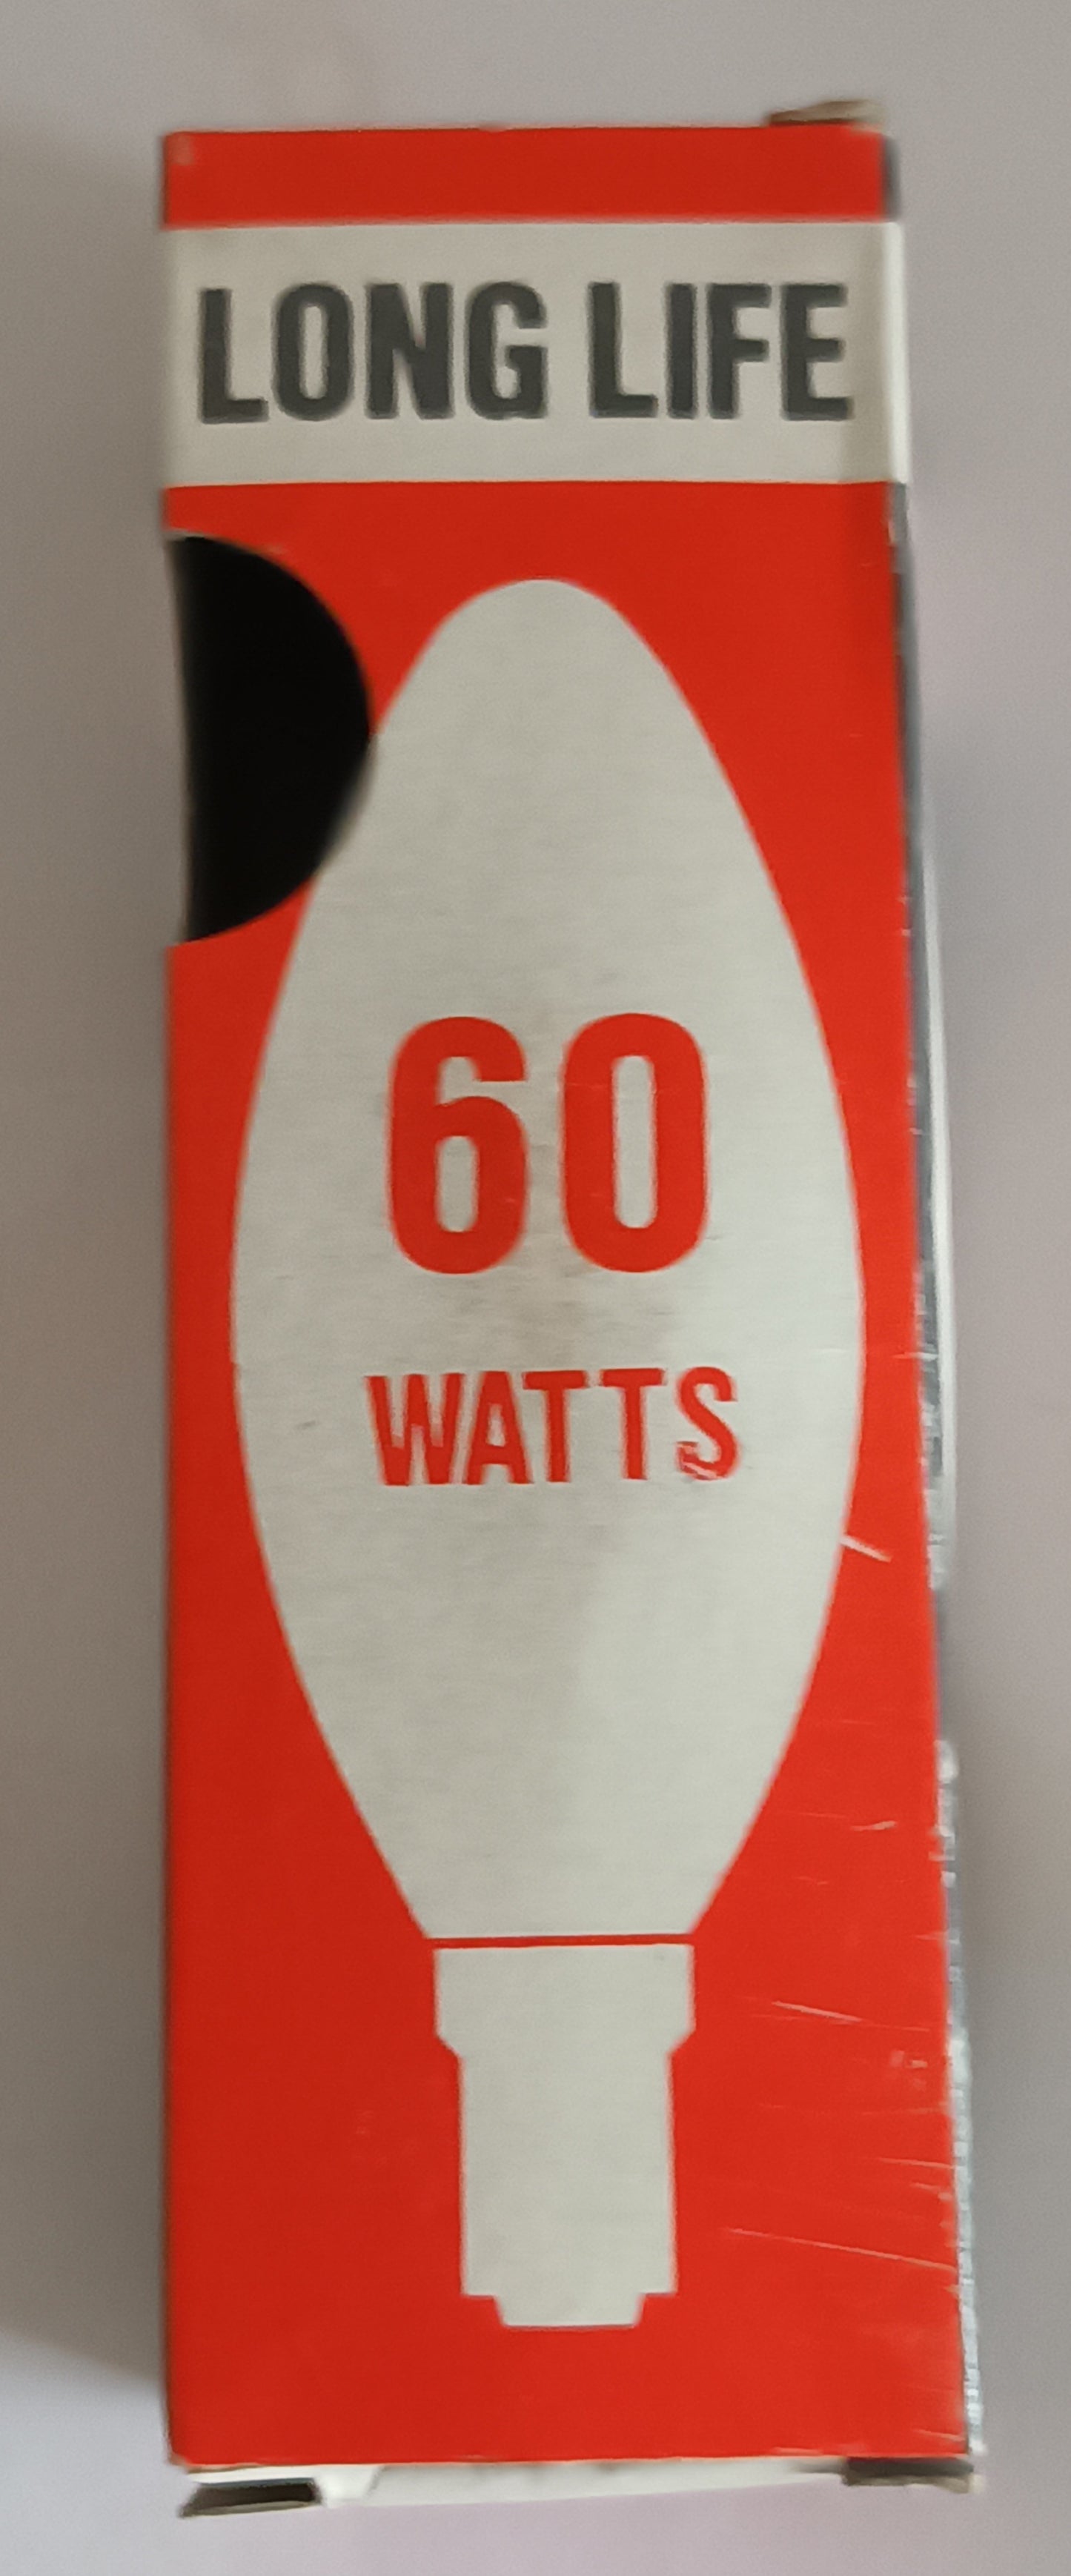 Candle 60watts ses / E14 opel  Sold in packs of ten by long life